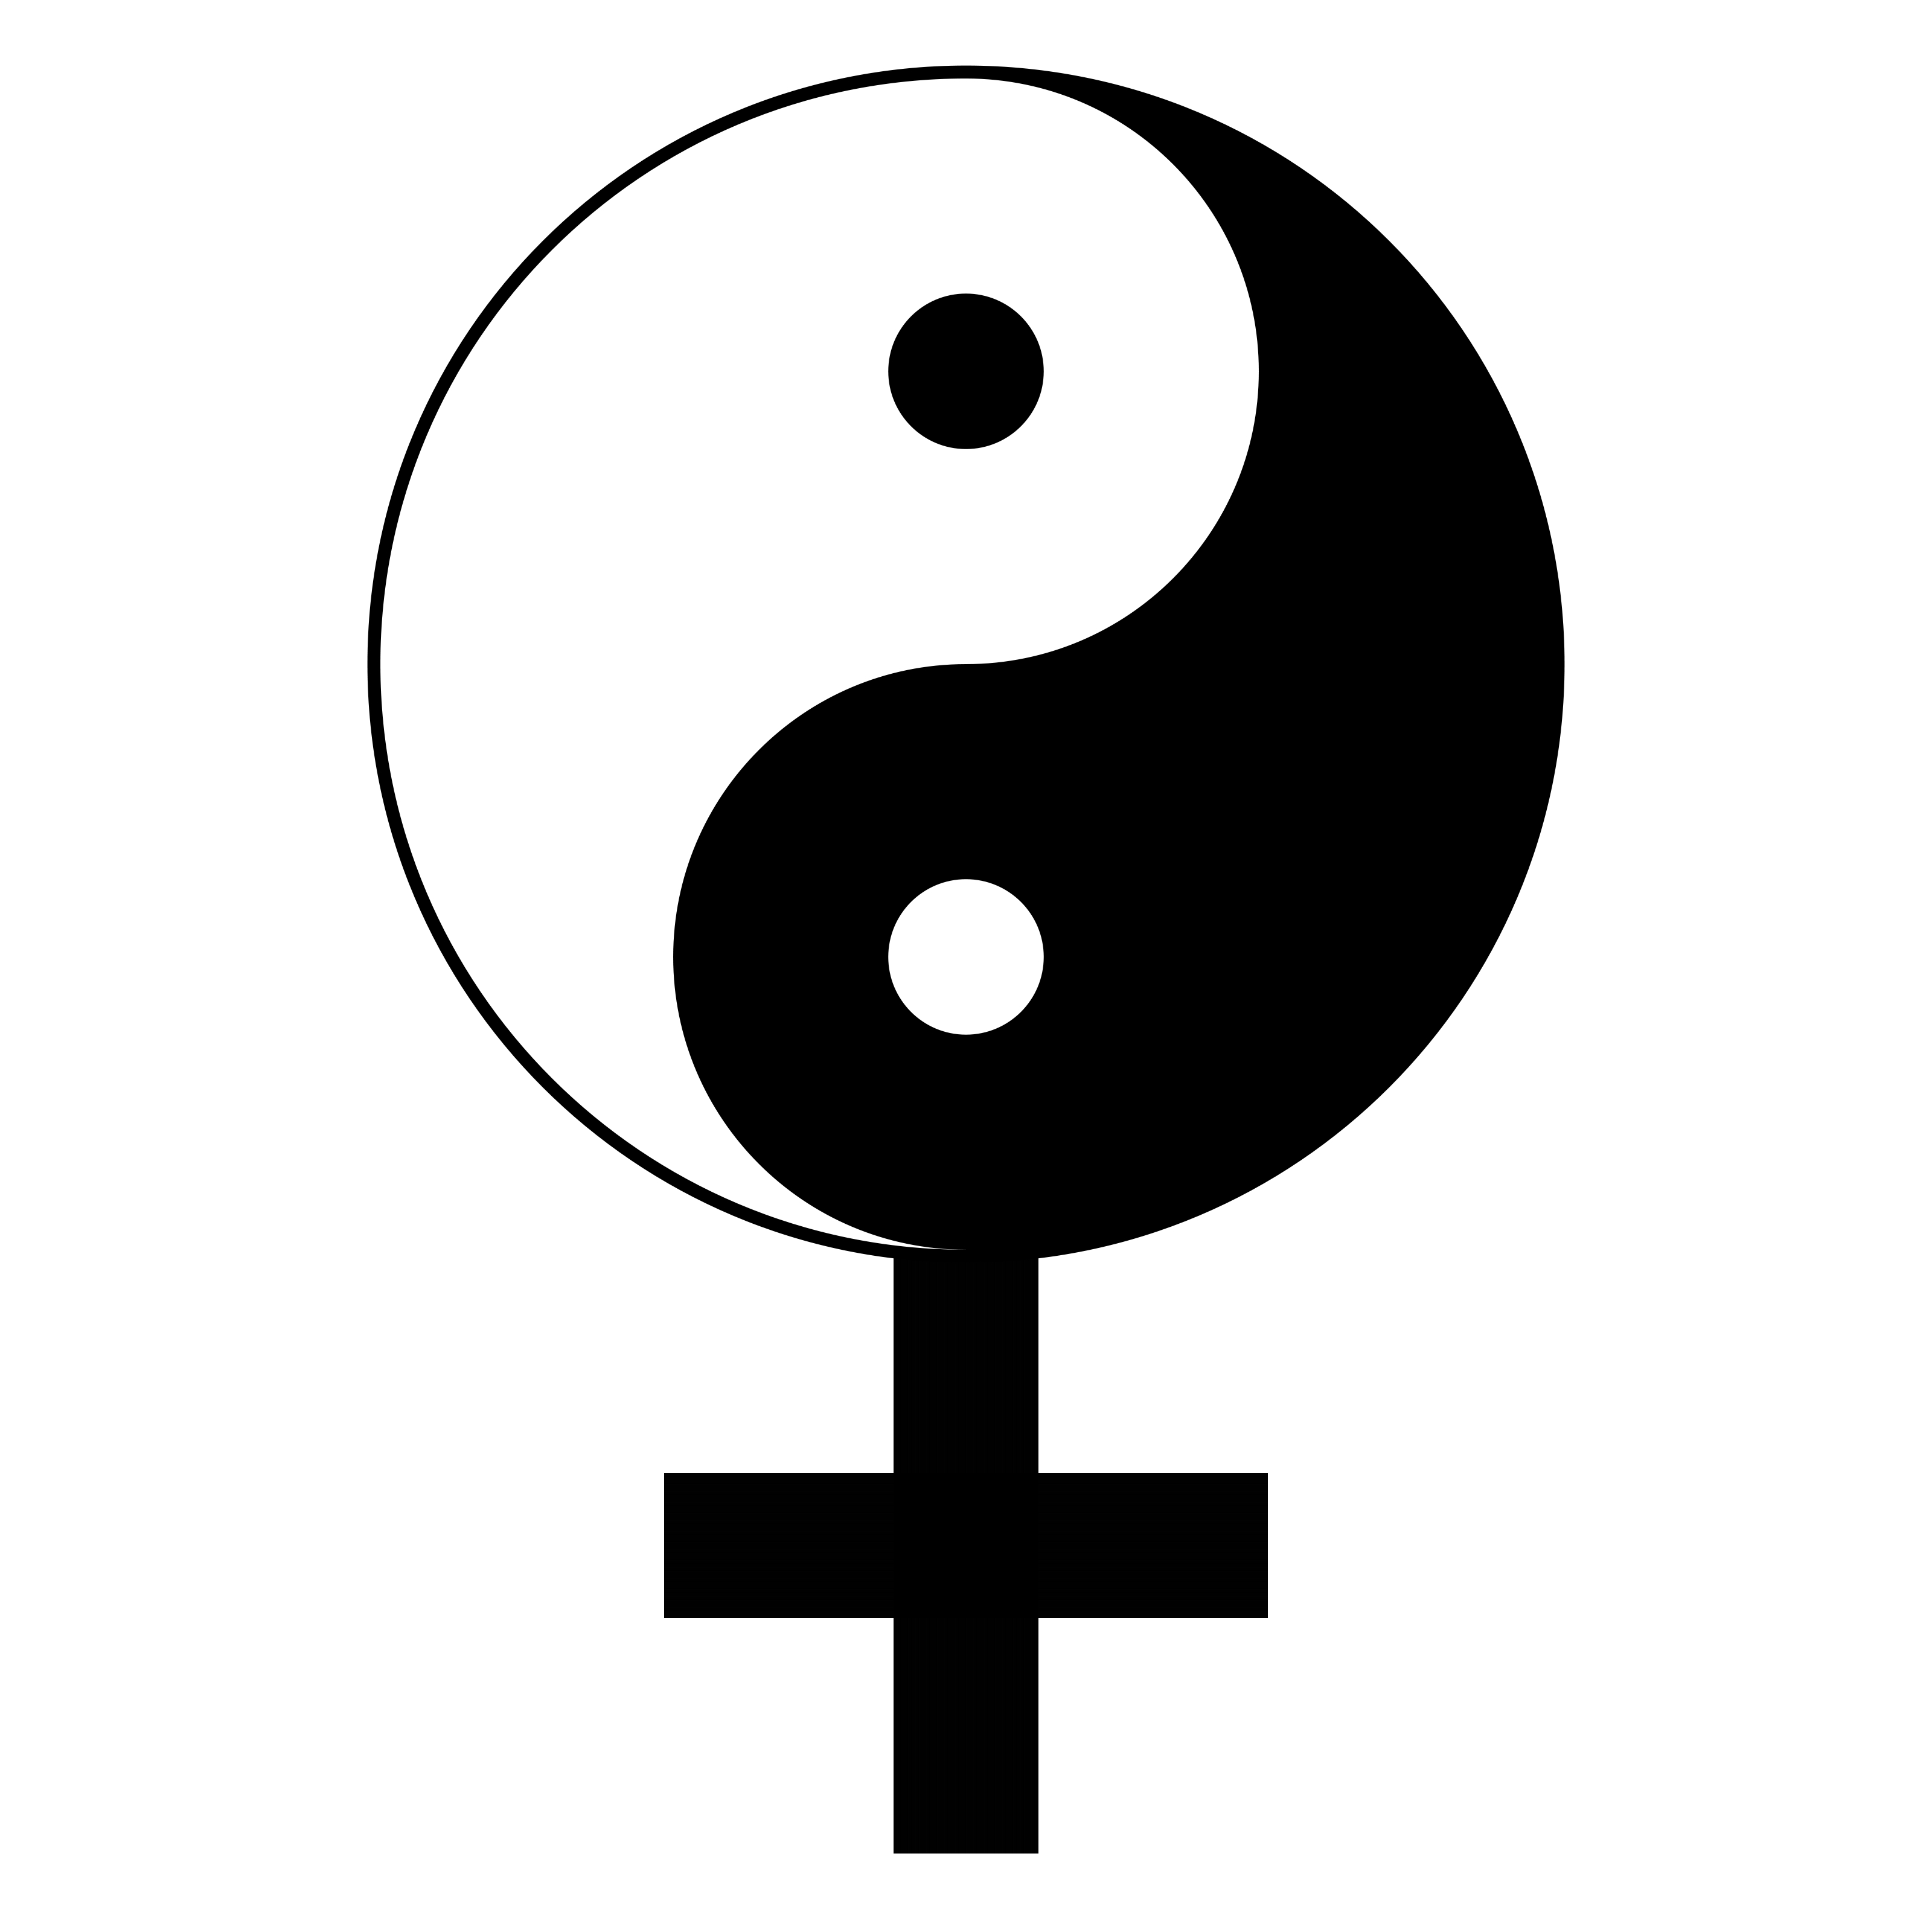 File:Trans-Female icon - Tao symbol combined with Female gender ...